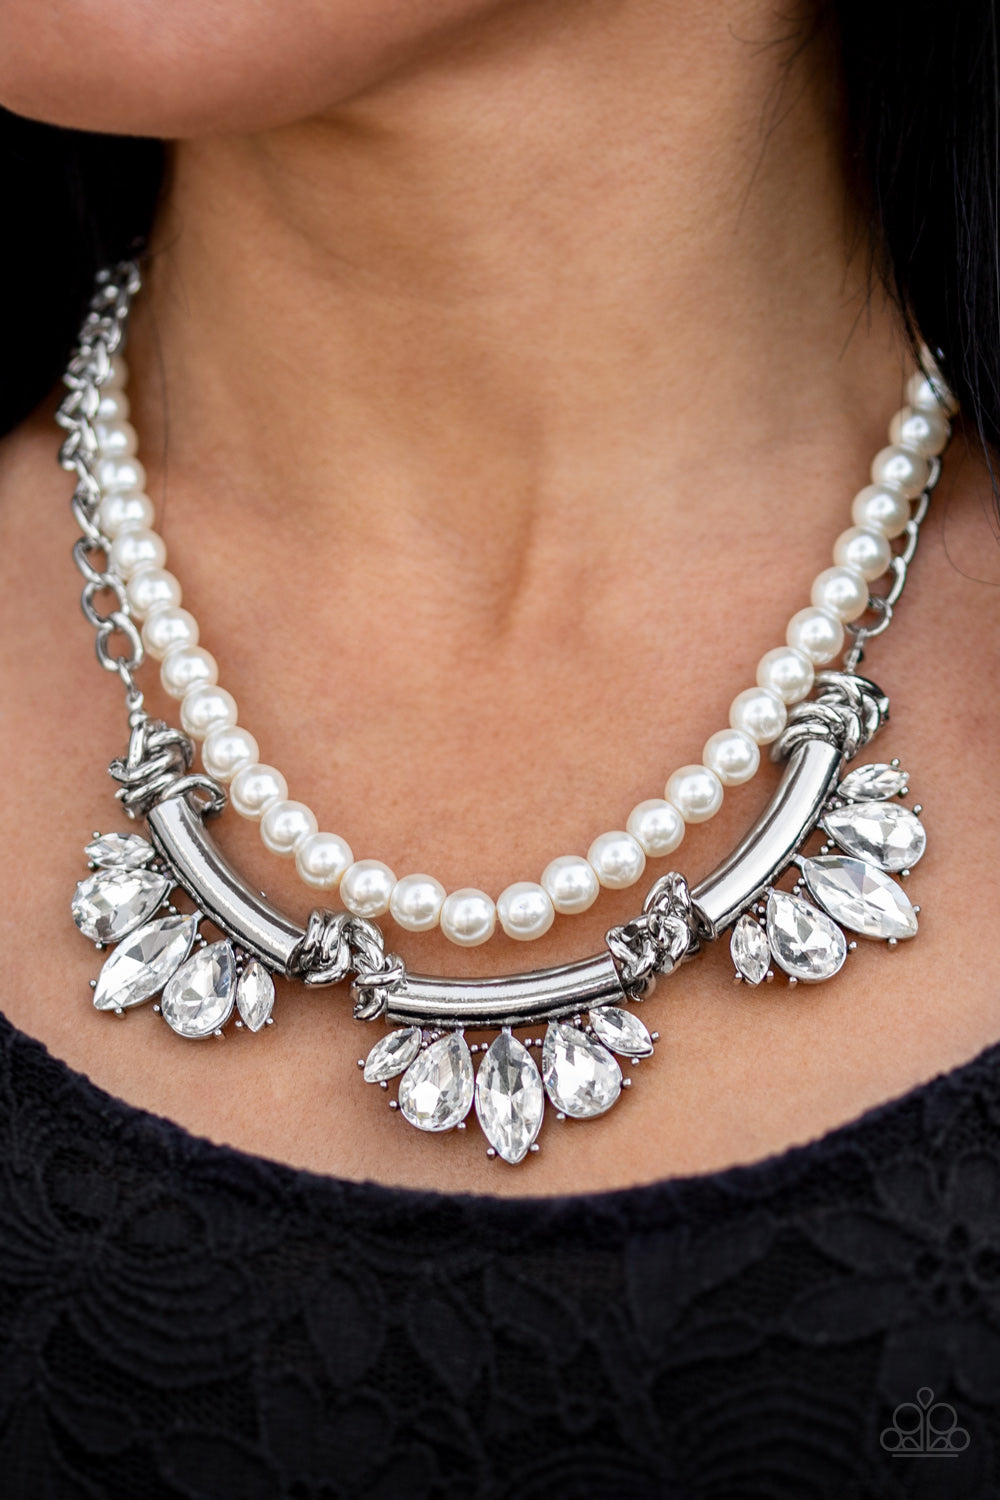 Bow Before The Queen - White pearls/ White rhinestones necklace